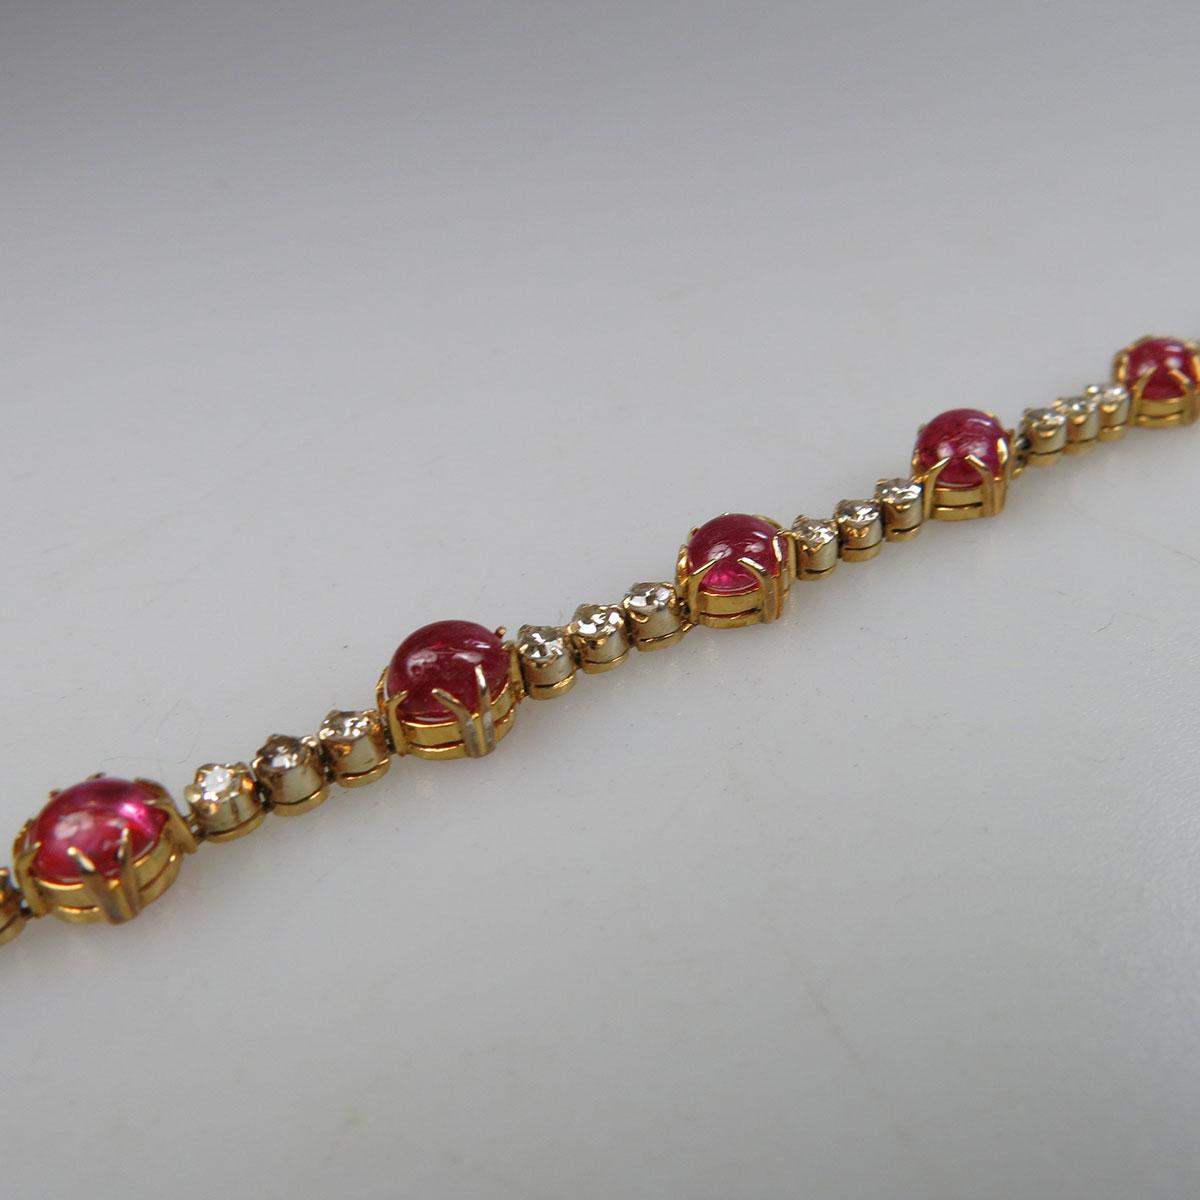 10k Yellow Gold And Silver Bracelet